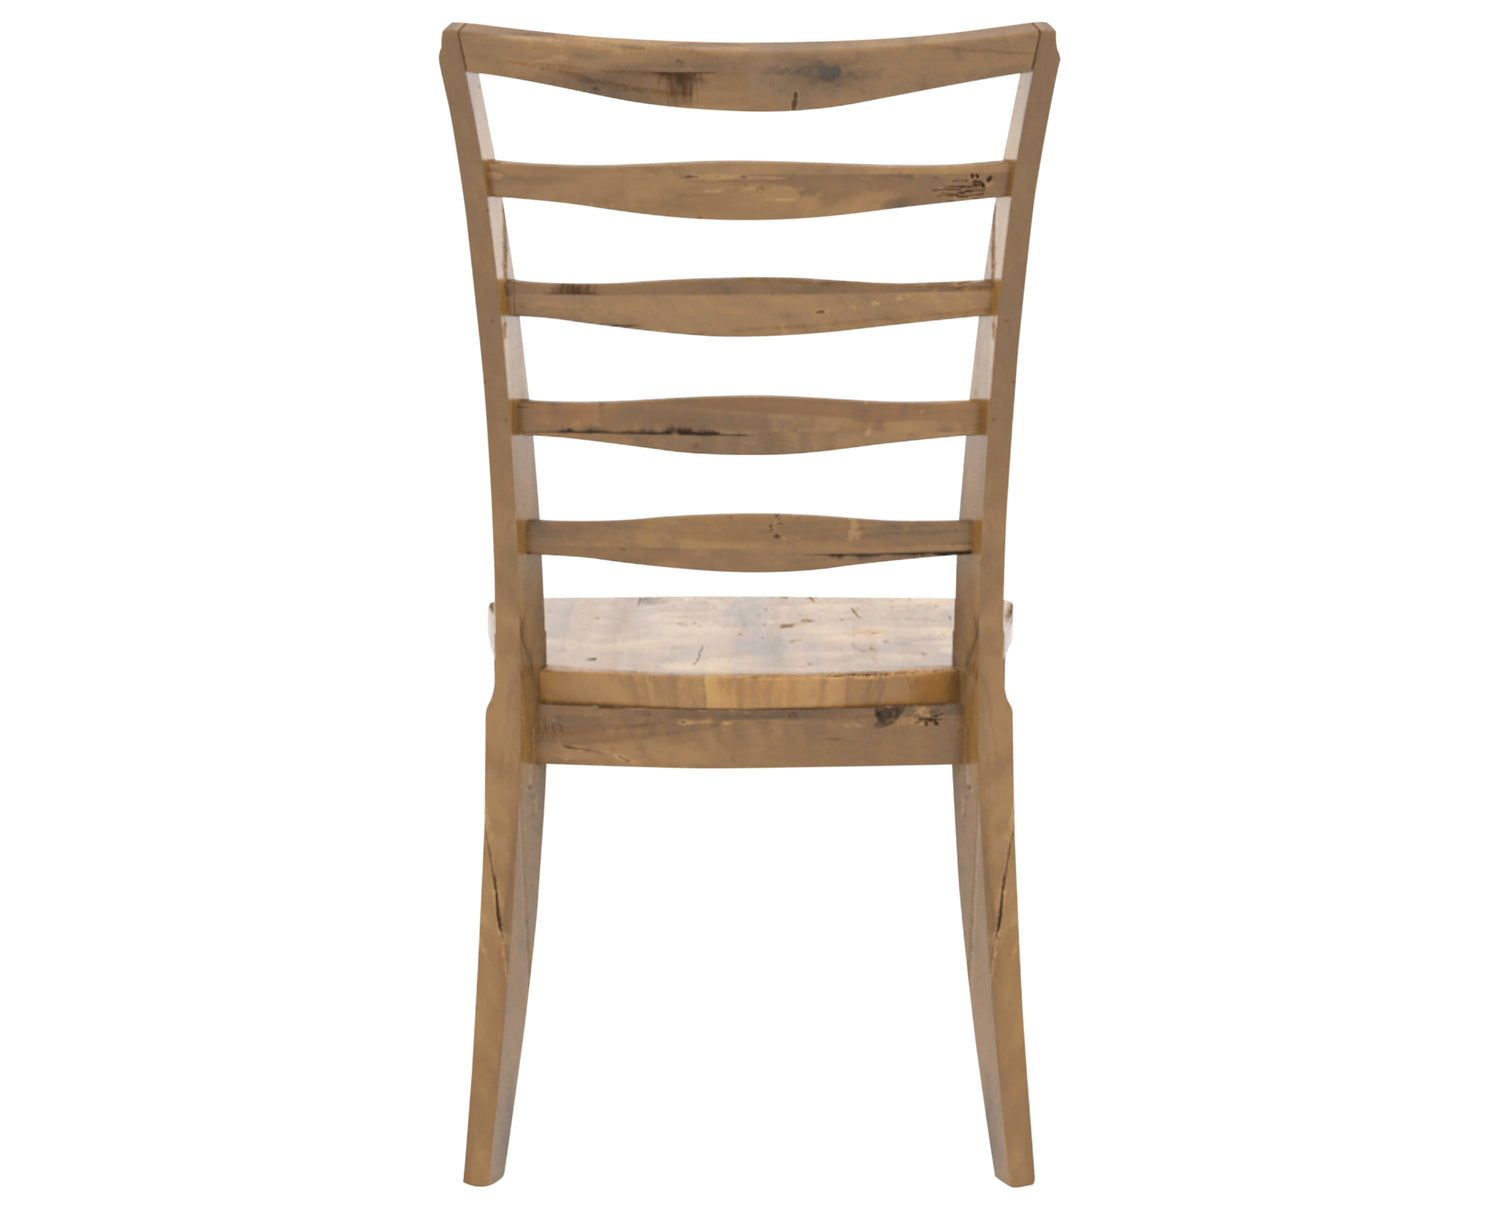 Oak Washed | Canadel Champlain Dining Chair 5185 | Valley Ridge Furniture